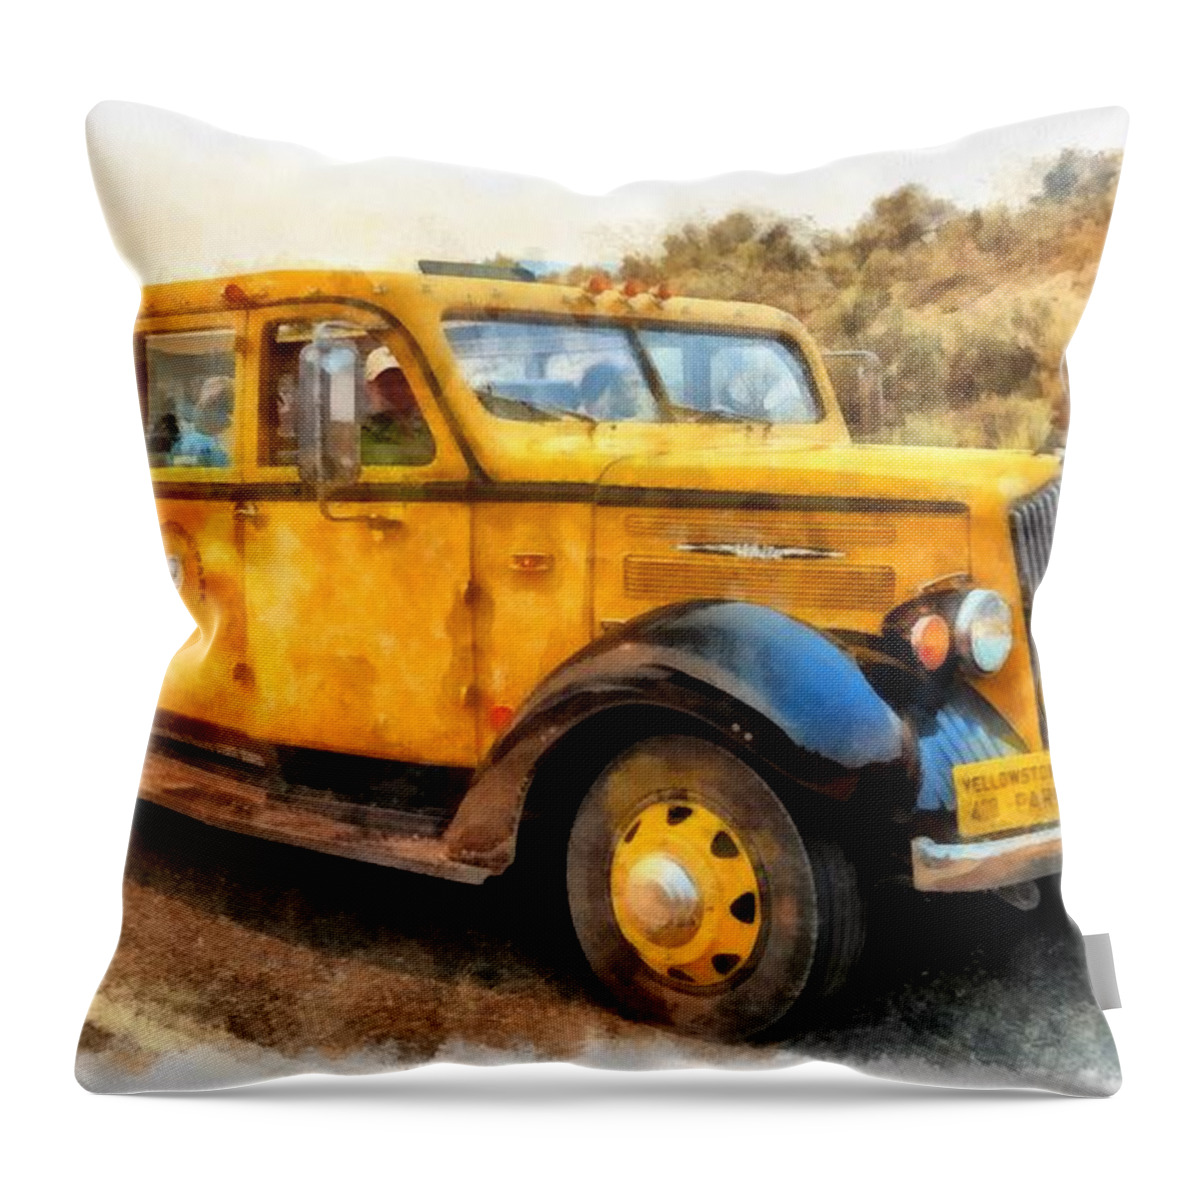 Yellowstone Throw Pillow featuring the digital art Yellowstone National Park Vintage Coach by Edward Fielding